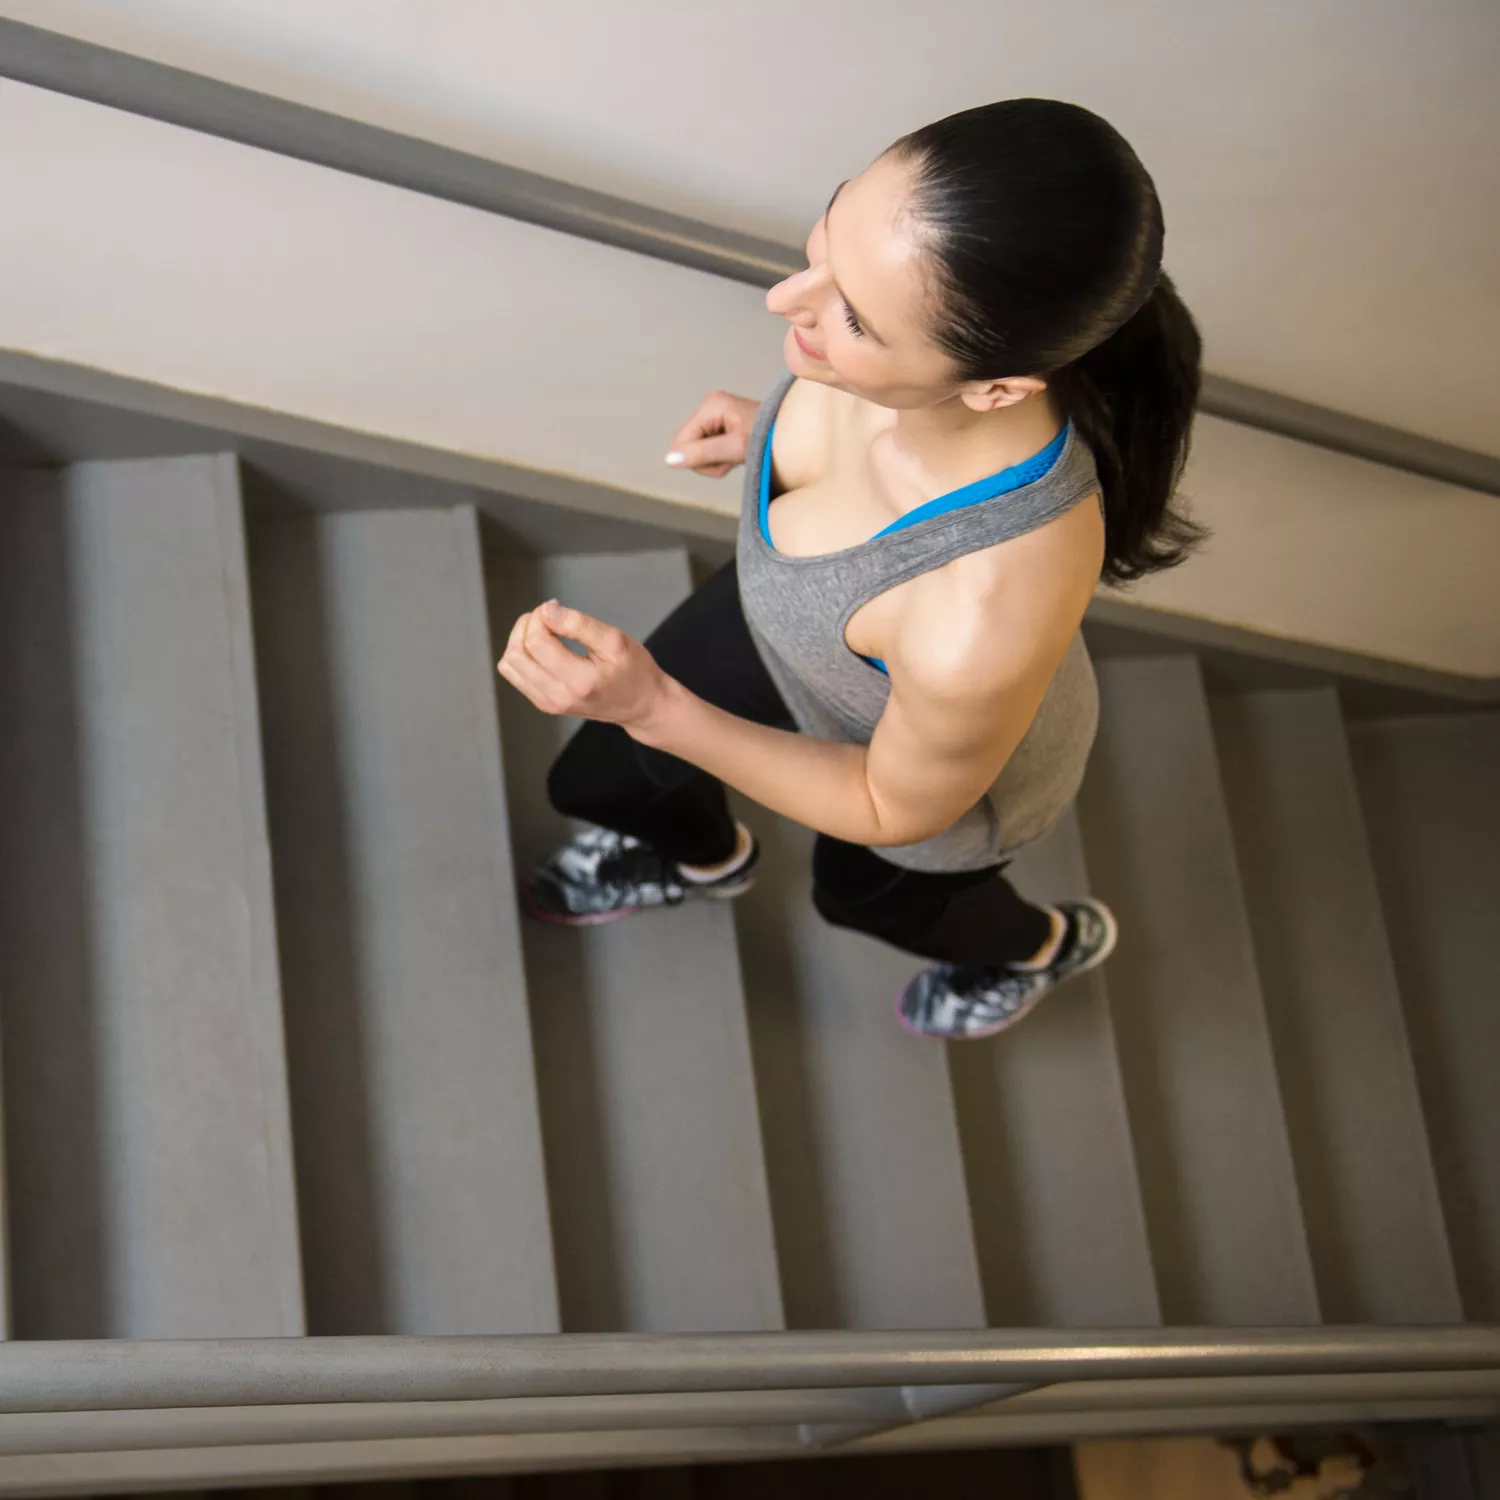 Stairs workout, stair exercises at home - trainer intro/warm-up (woman working out on stairs inside)